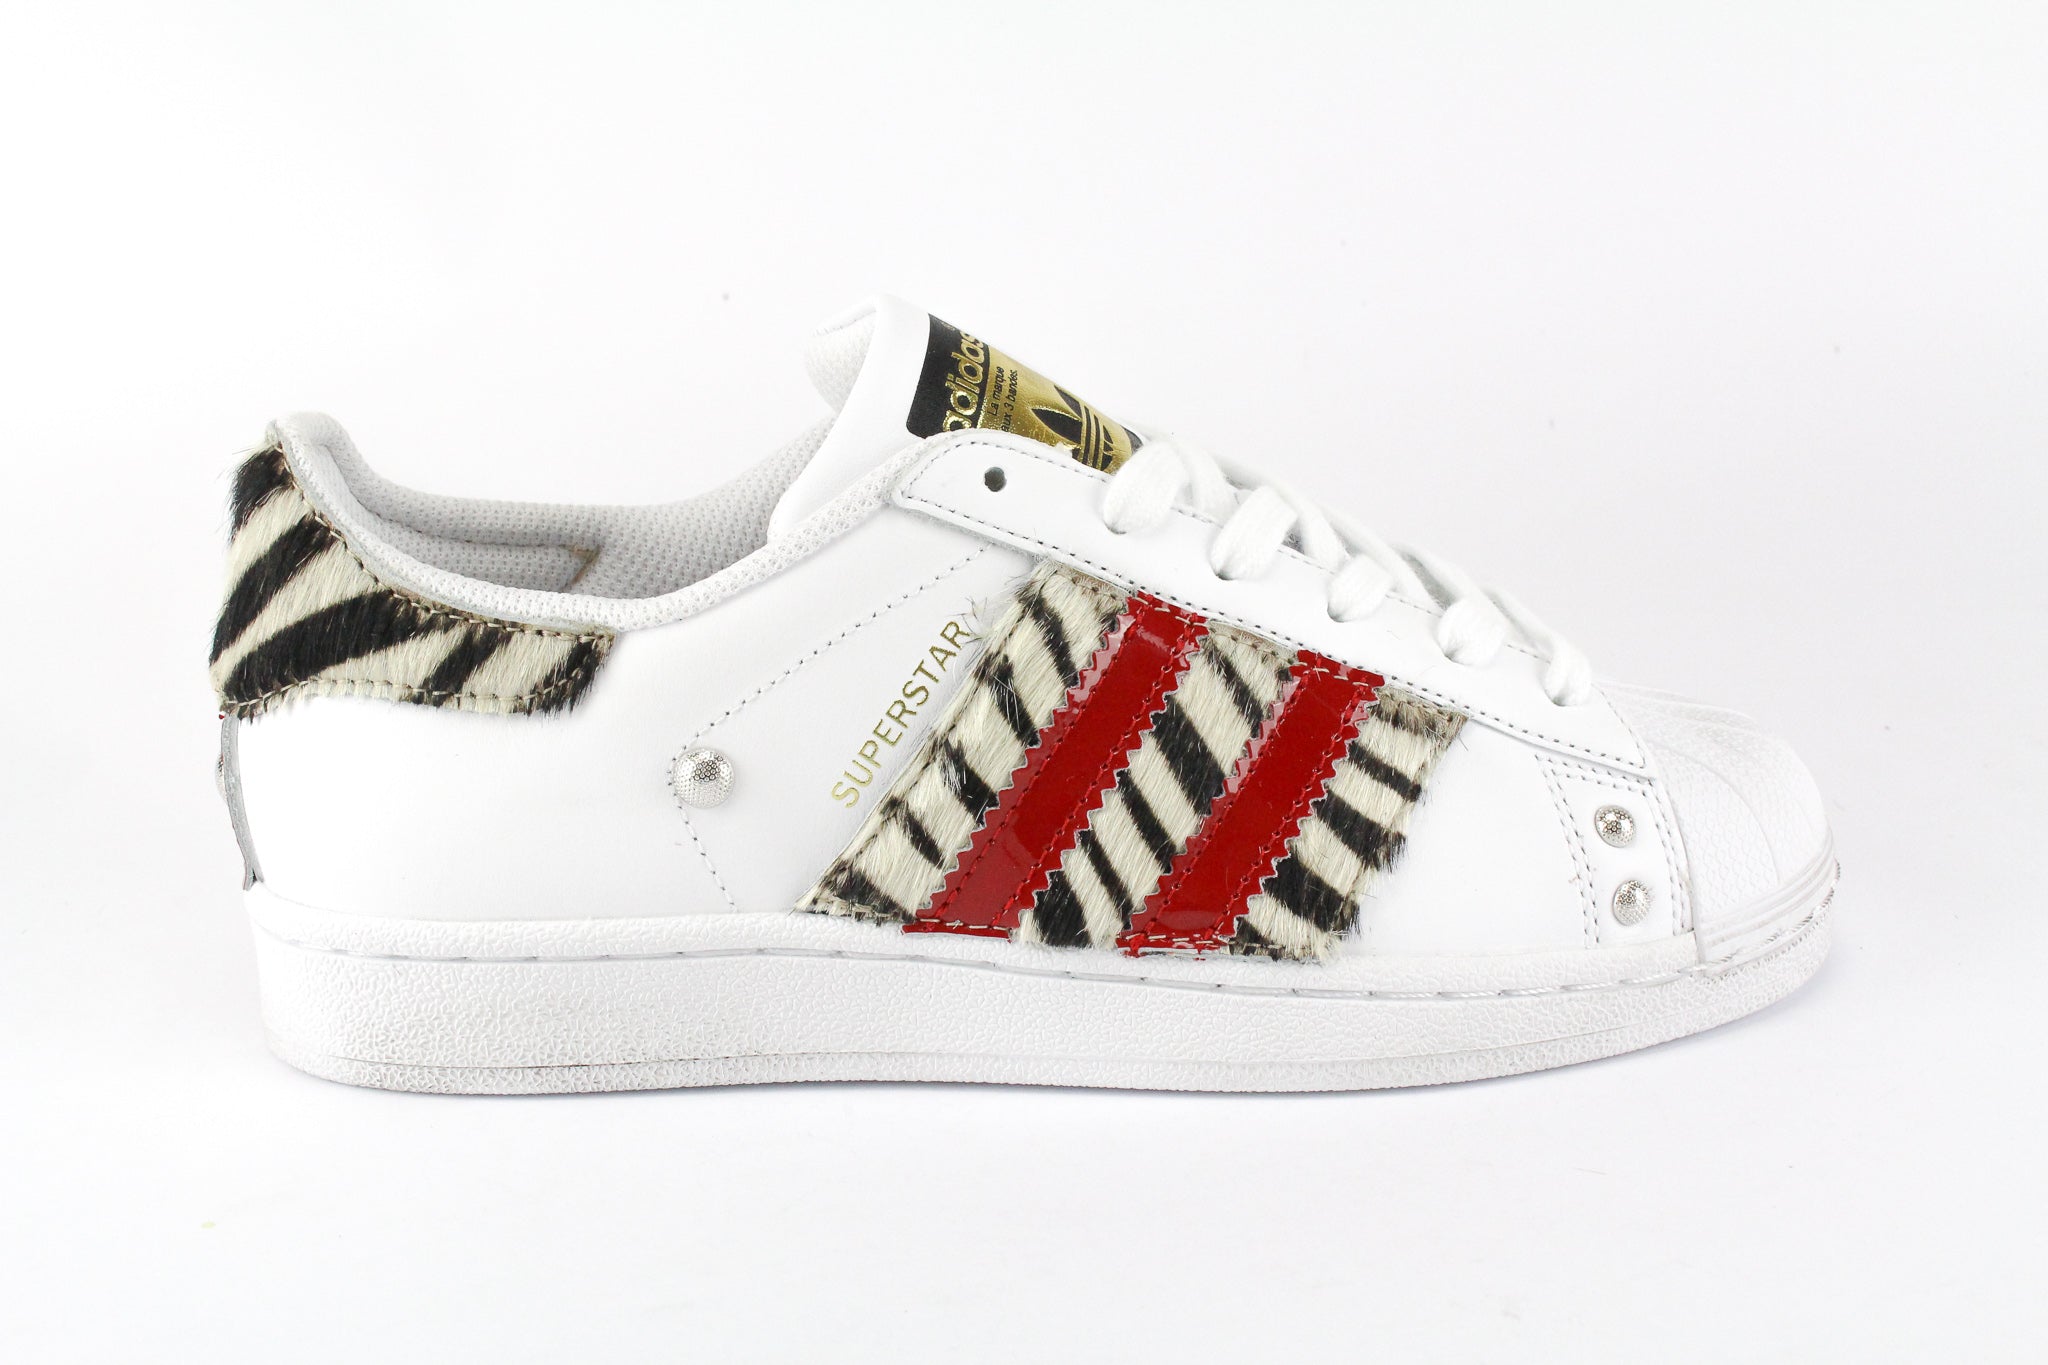 Adidas Superstar Zebrate &amp; Red Patent